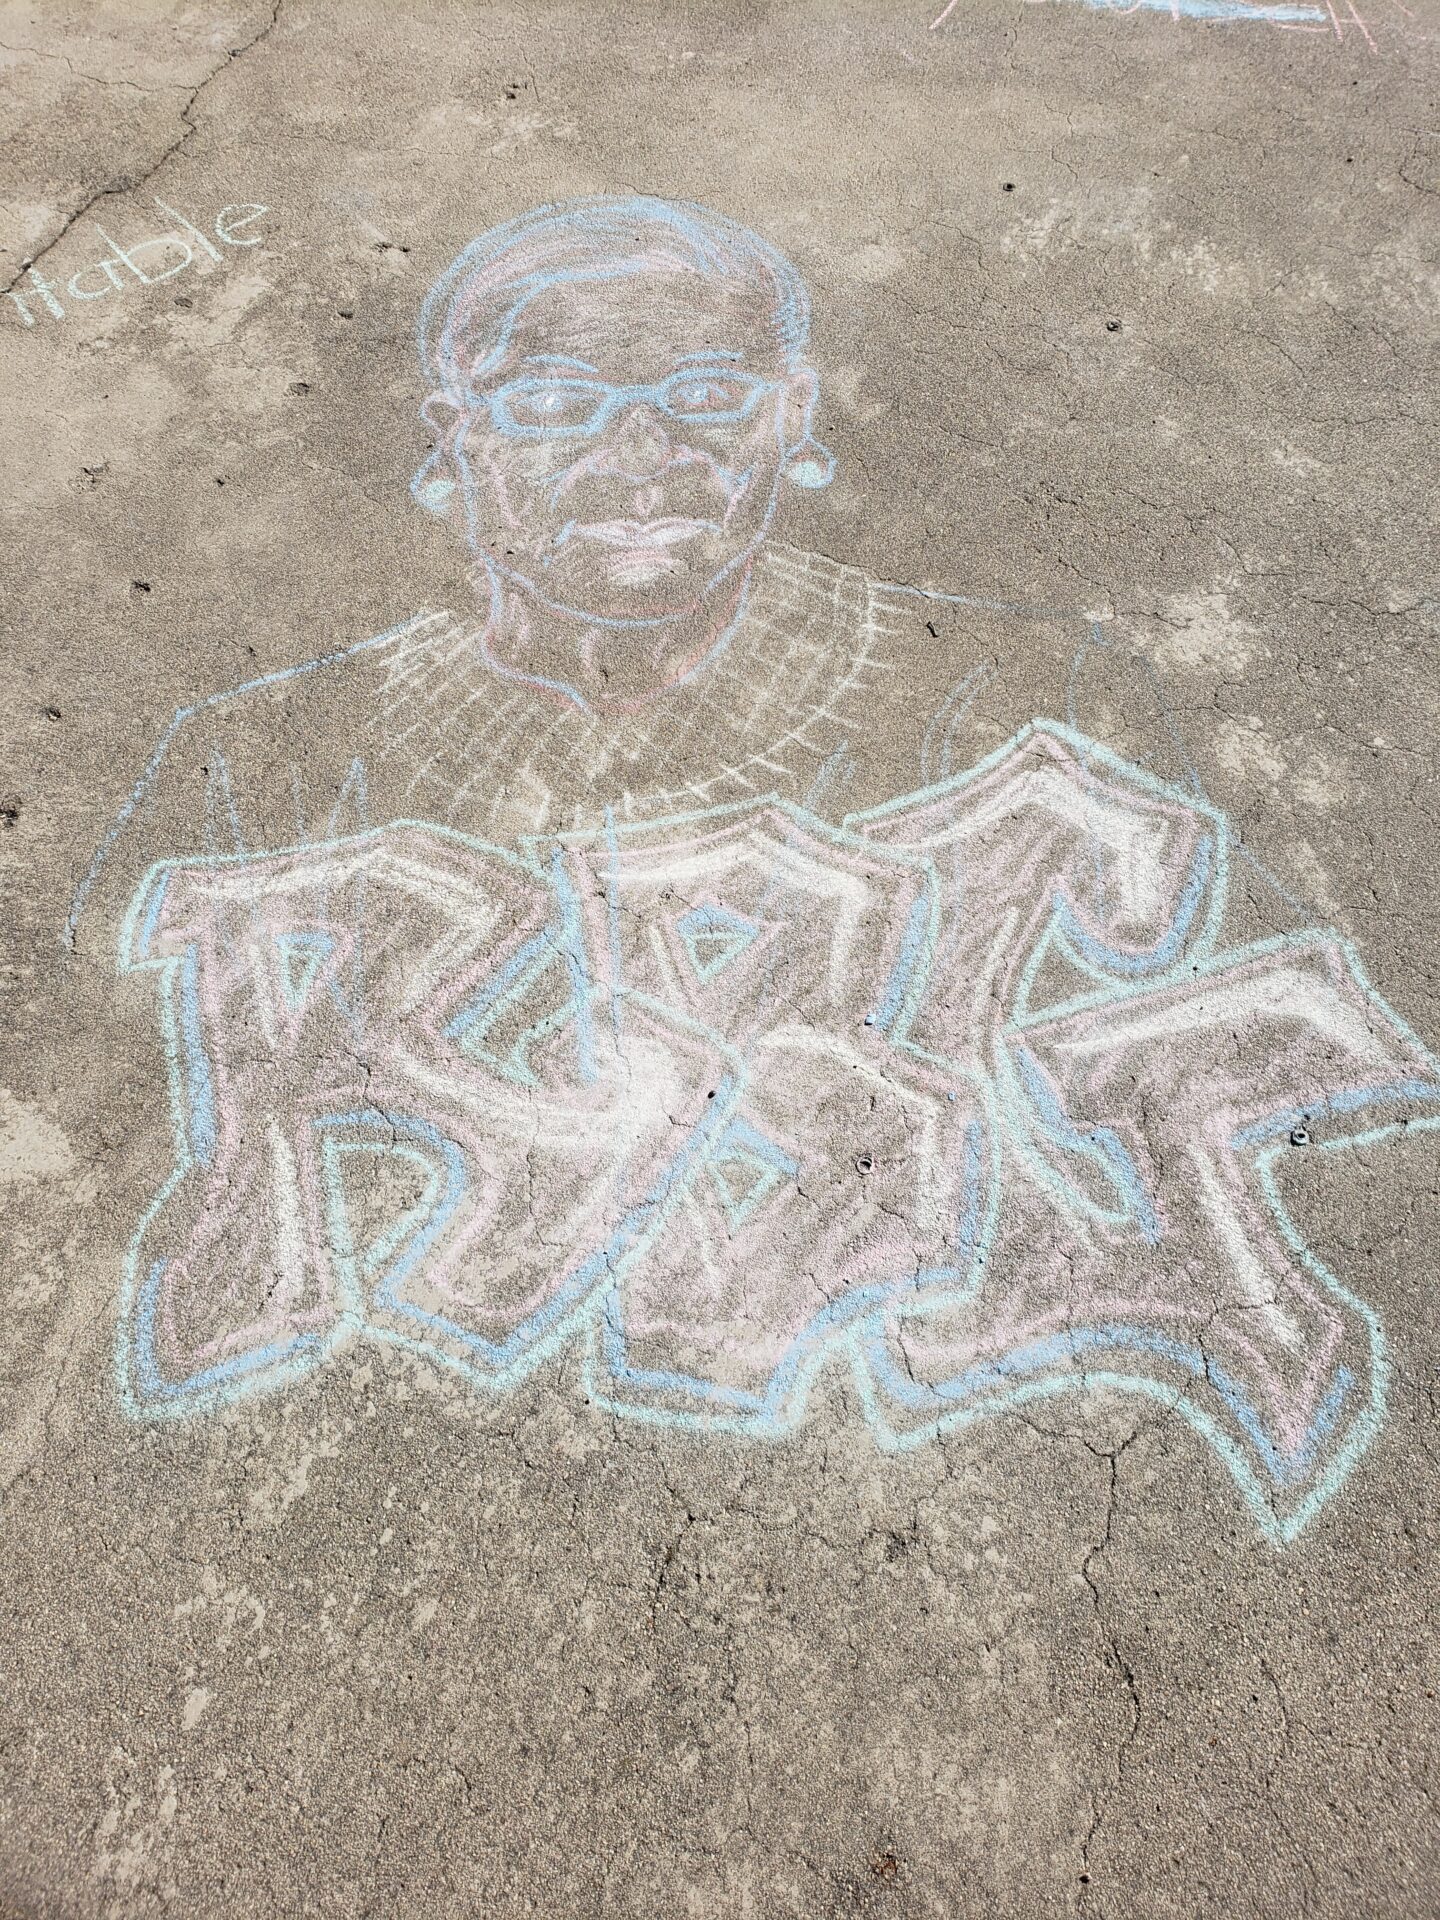 A chalk drawing of Ruth Bader Ginsburg drawn outside the Old Idaho Penitentiary by a visitor. Photo by Hayley Noble.